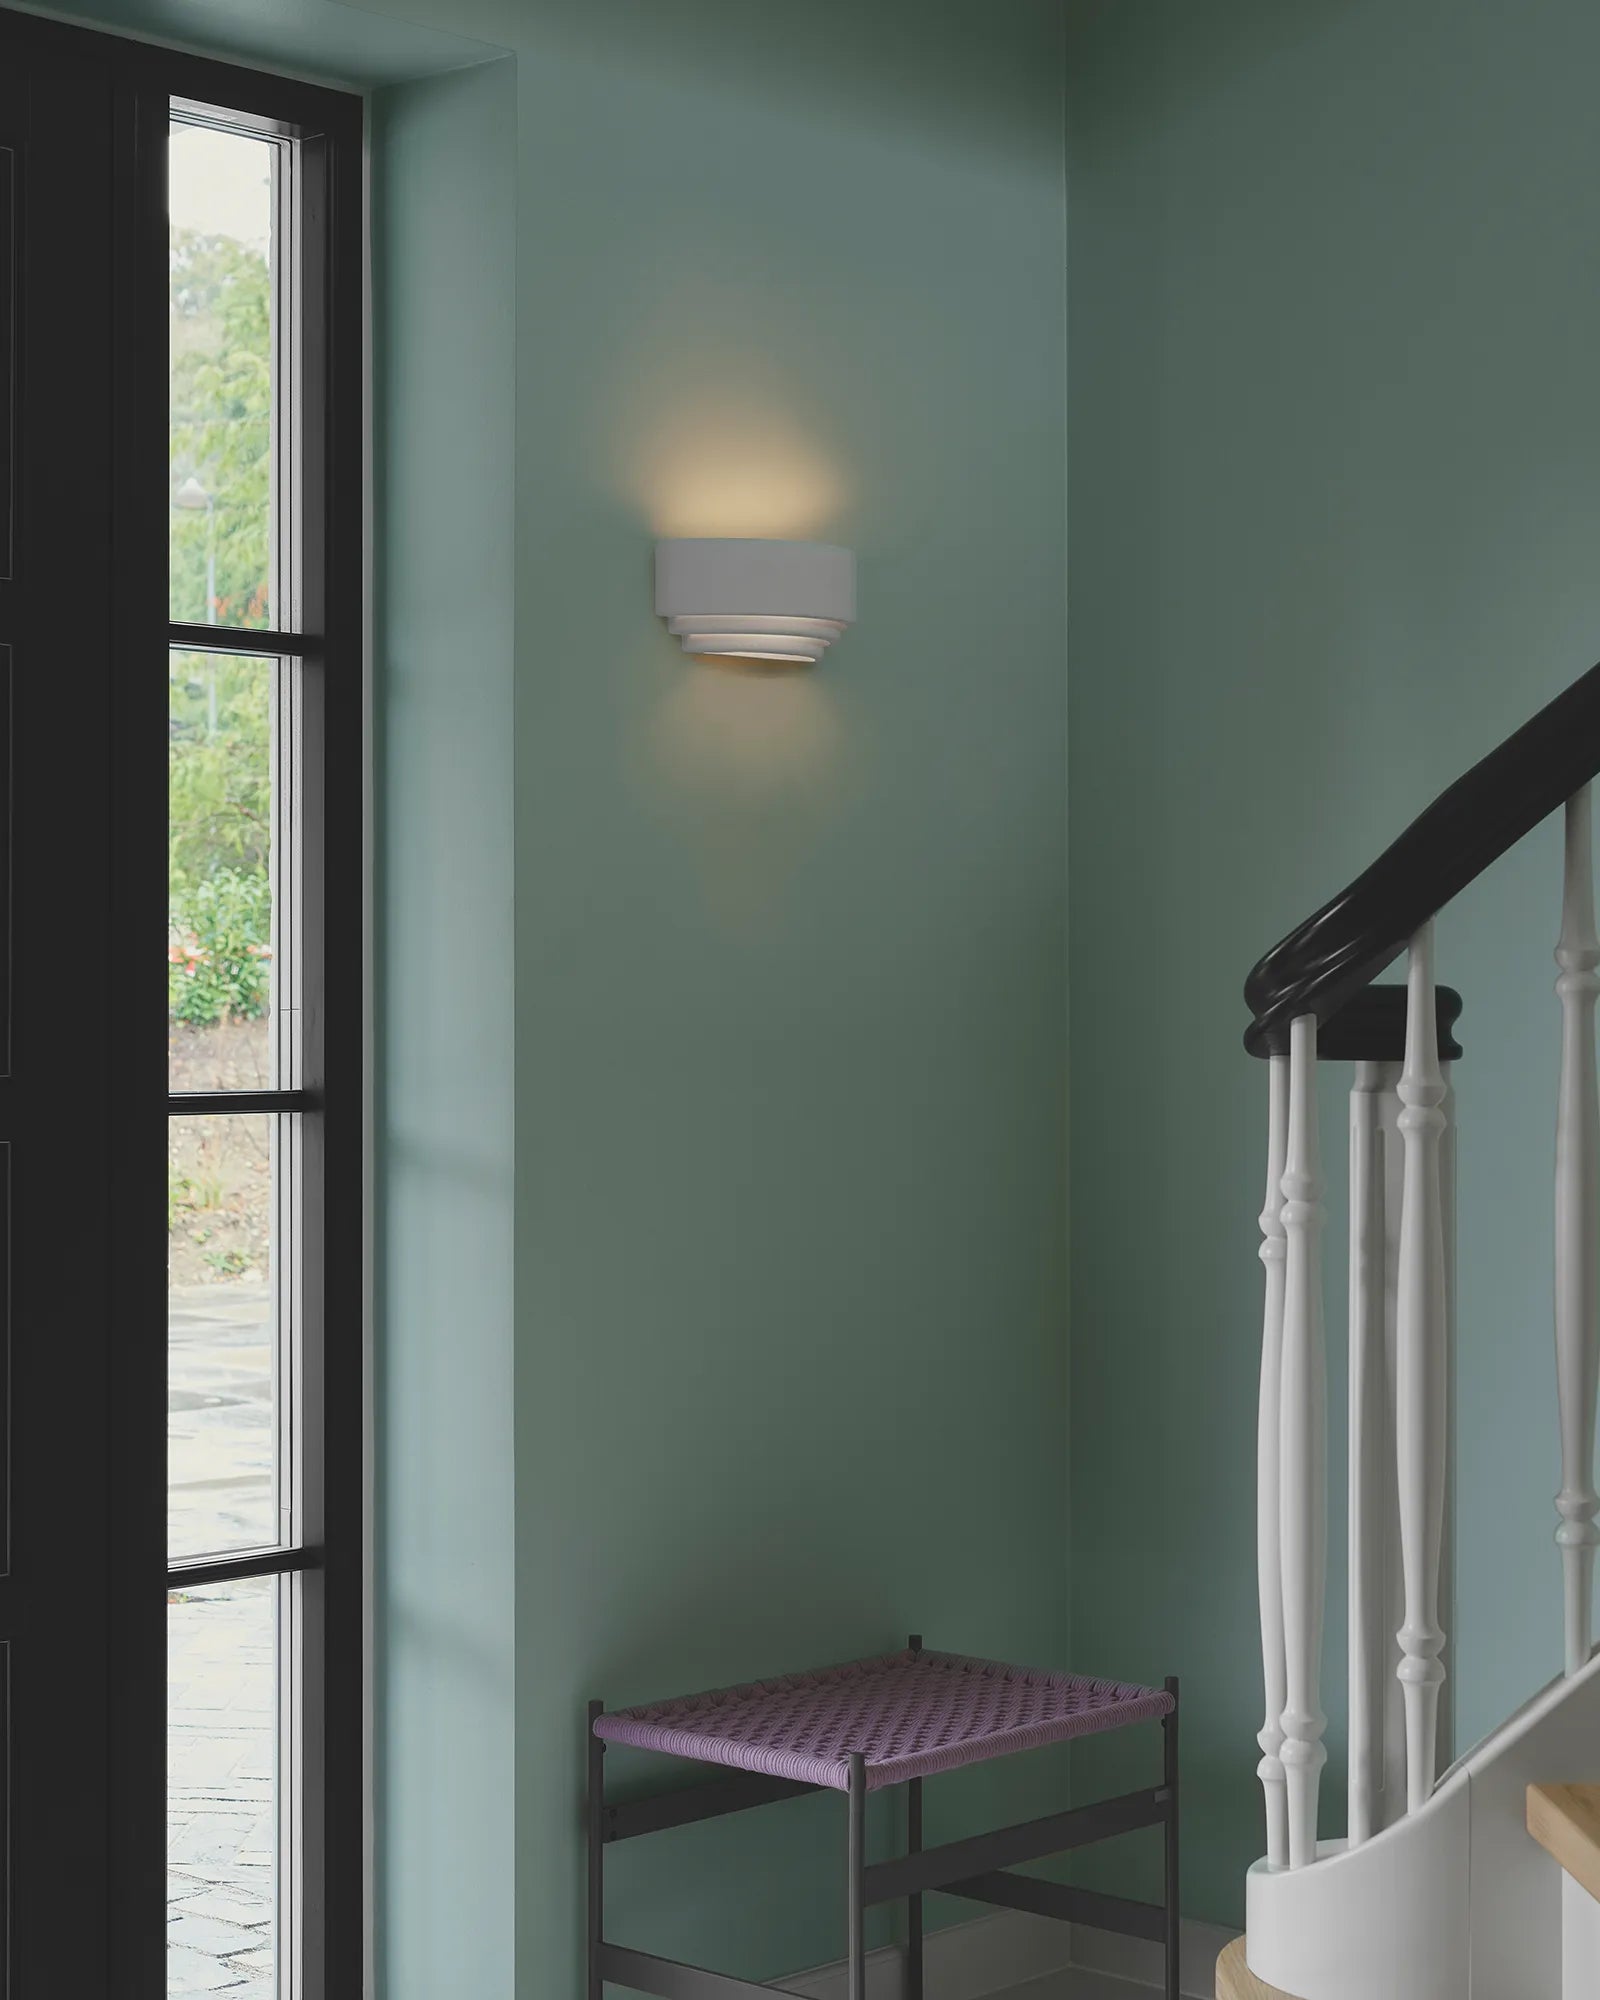 Lancio Oblong Wall Light by Nordlux Lighting featured in a stairway | Nook Collections